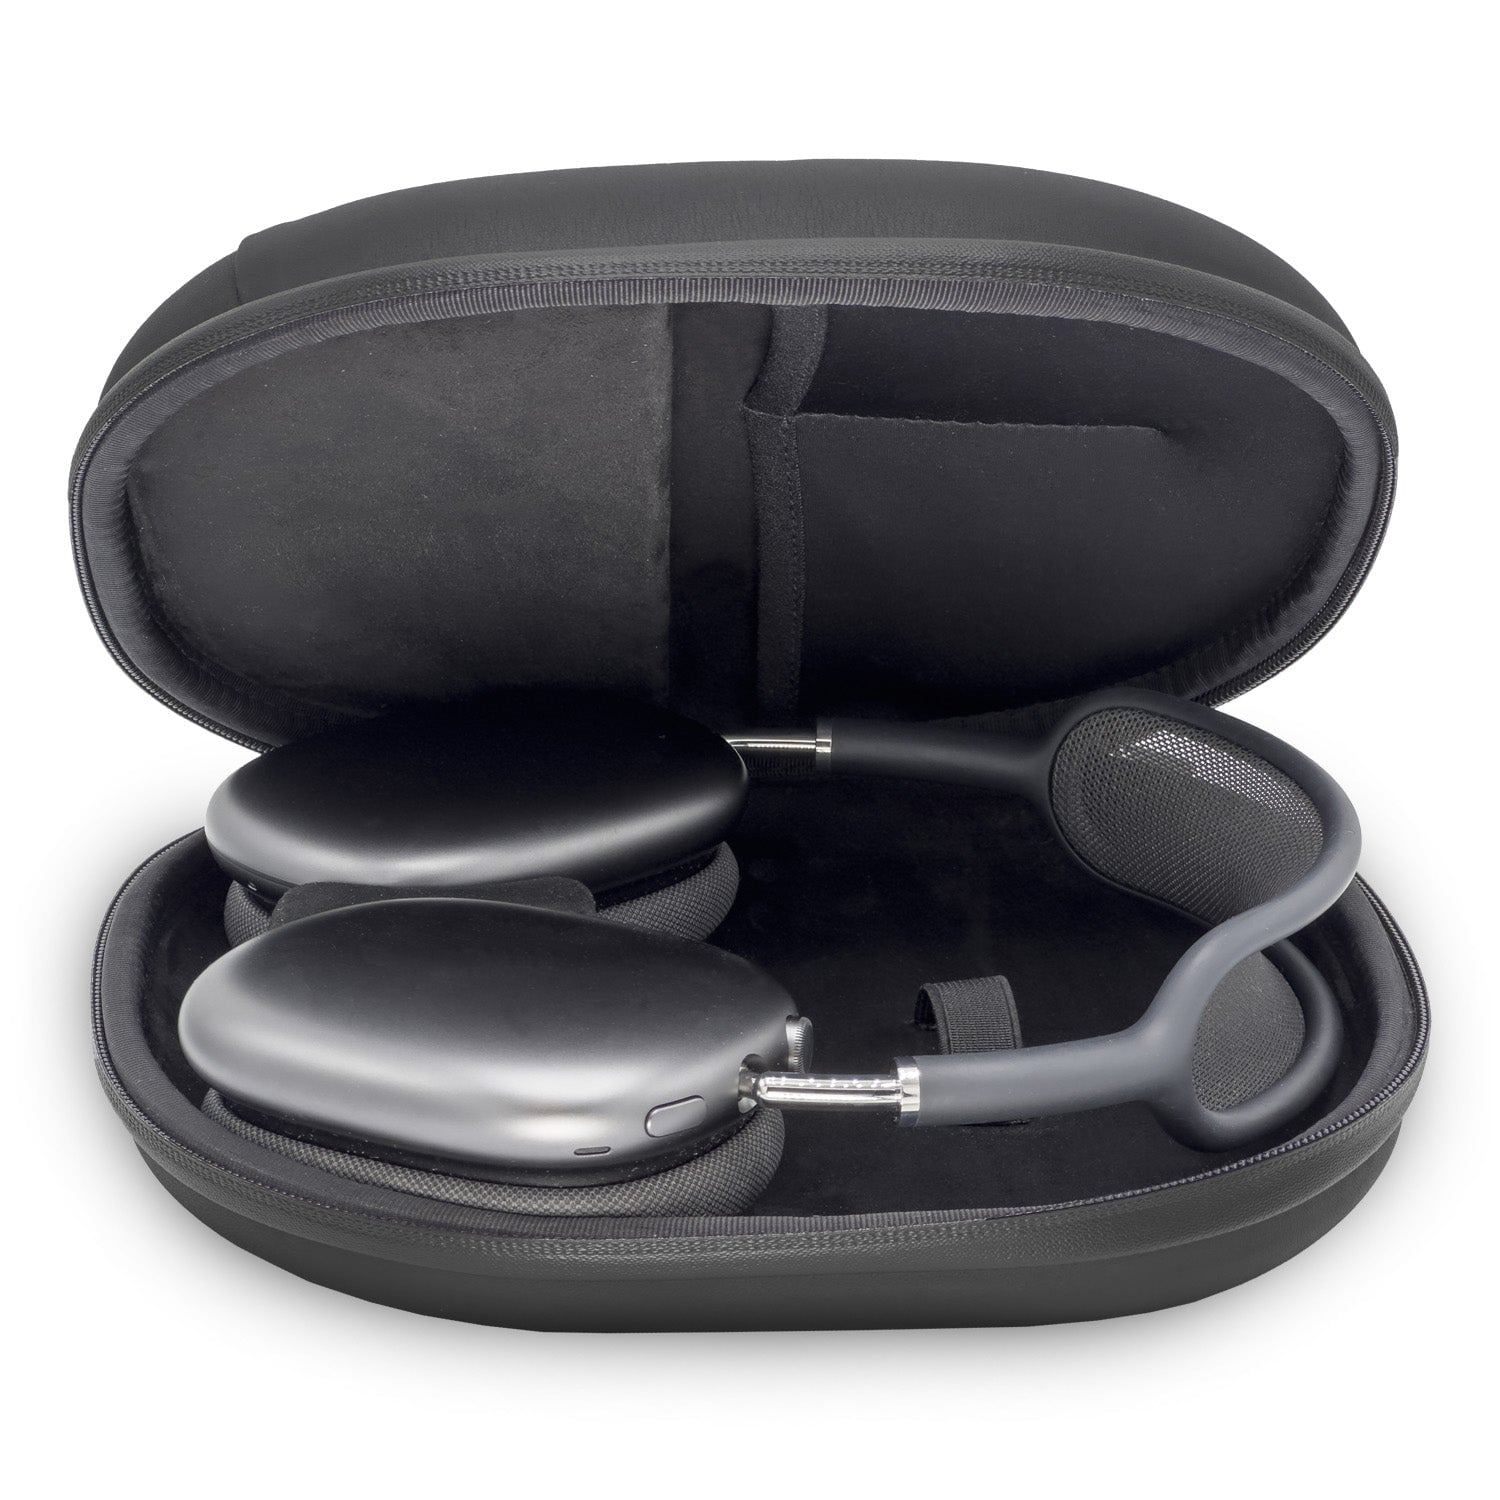 Leather AirPods Max Travel Case